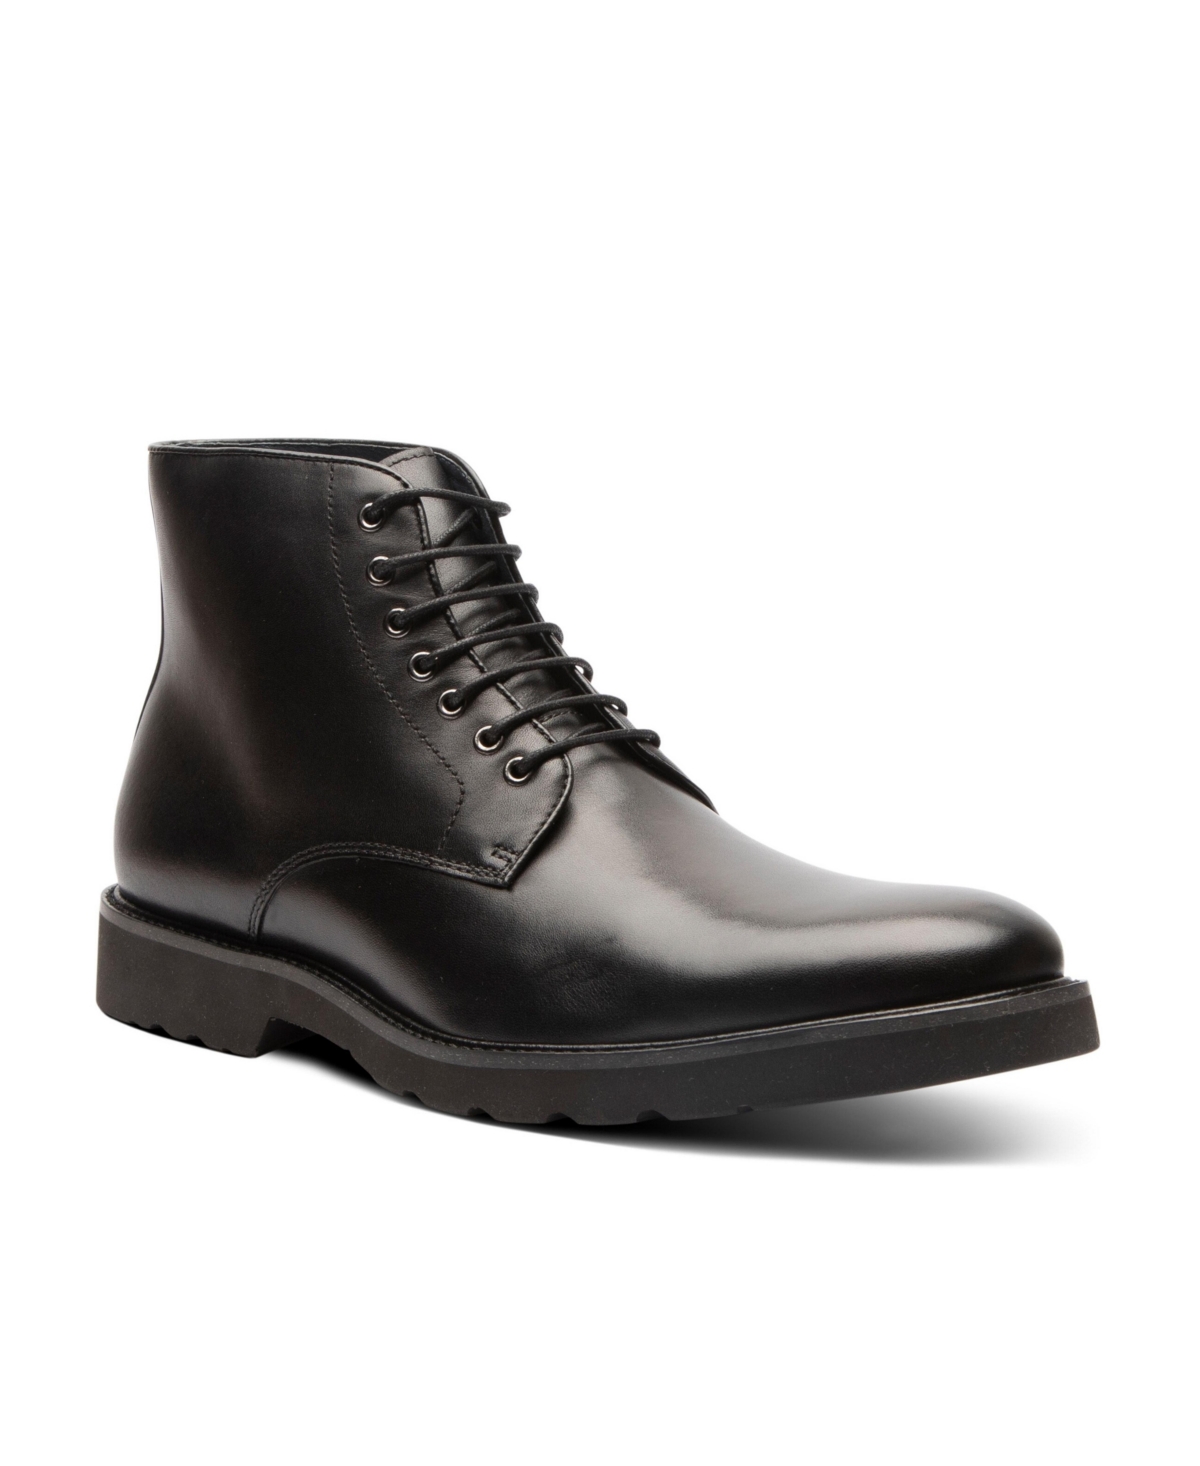 Men's Powell Boot Dress Casual Lace-Up Boots - Black